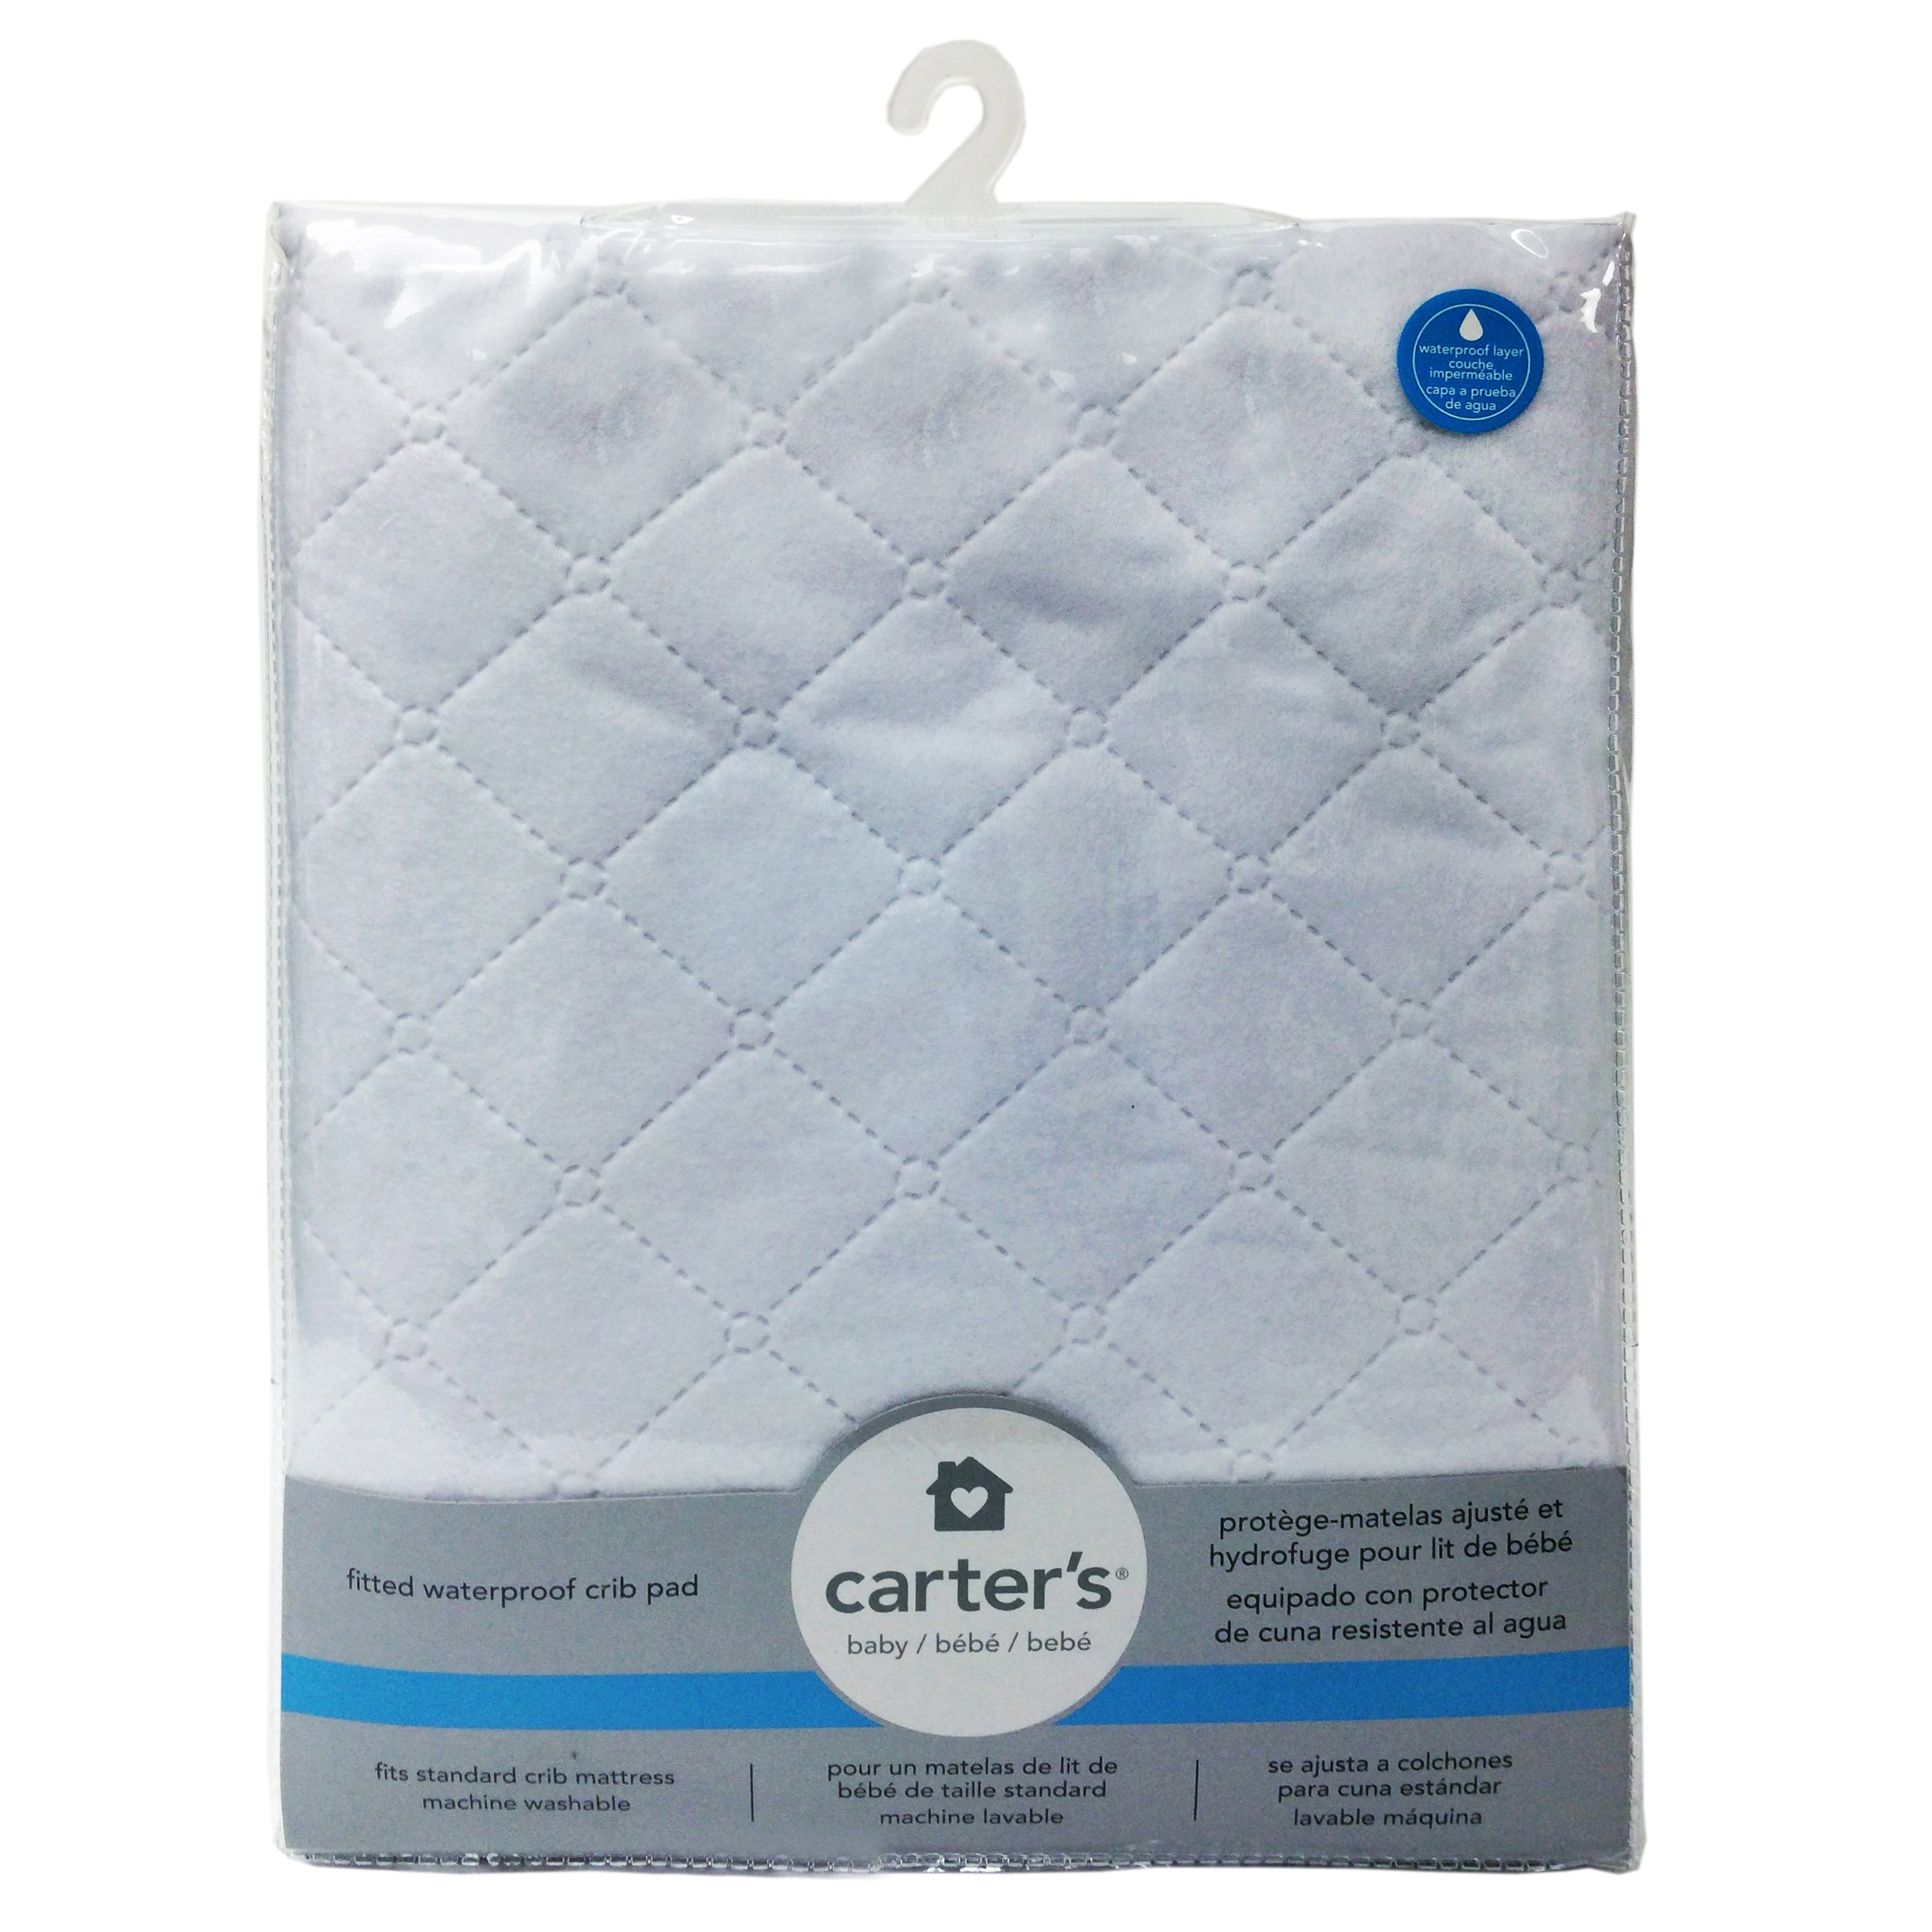 Carter's Waterproof pad Fitted Crib Pad 28 x 52